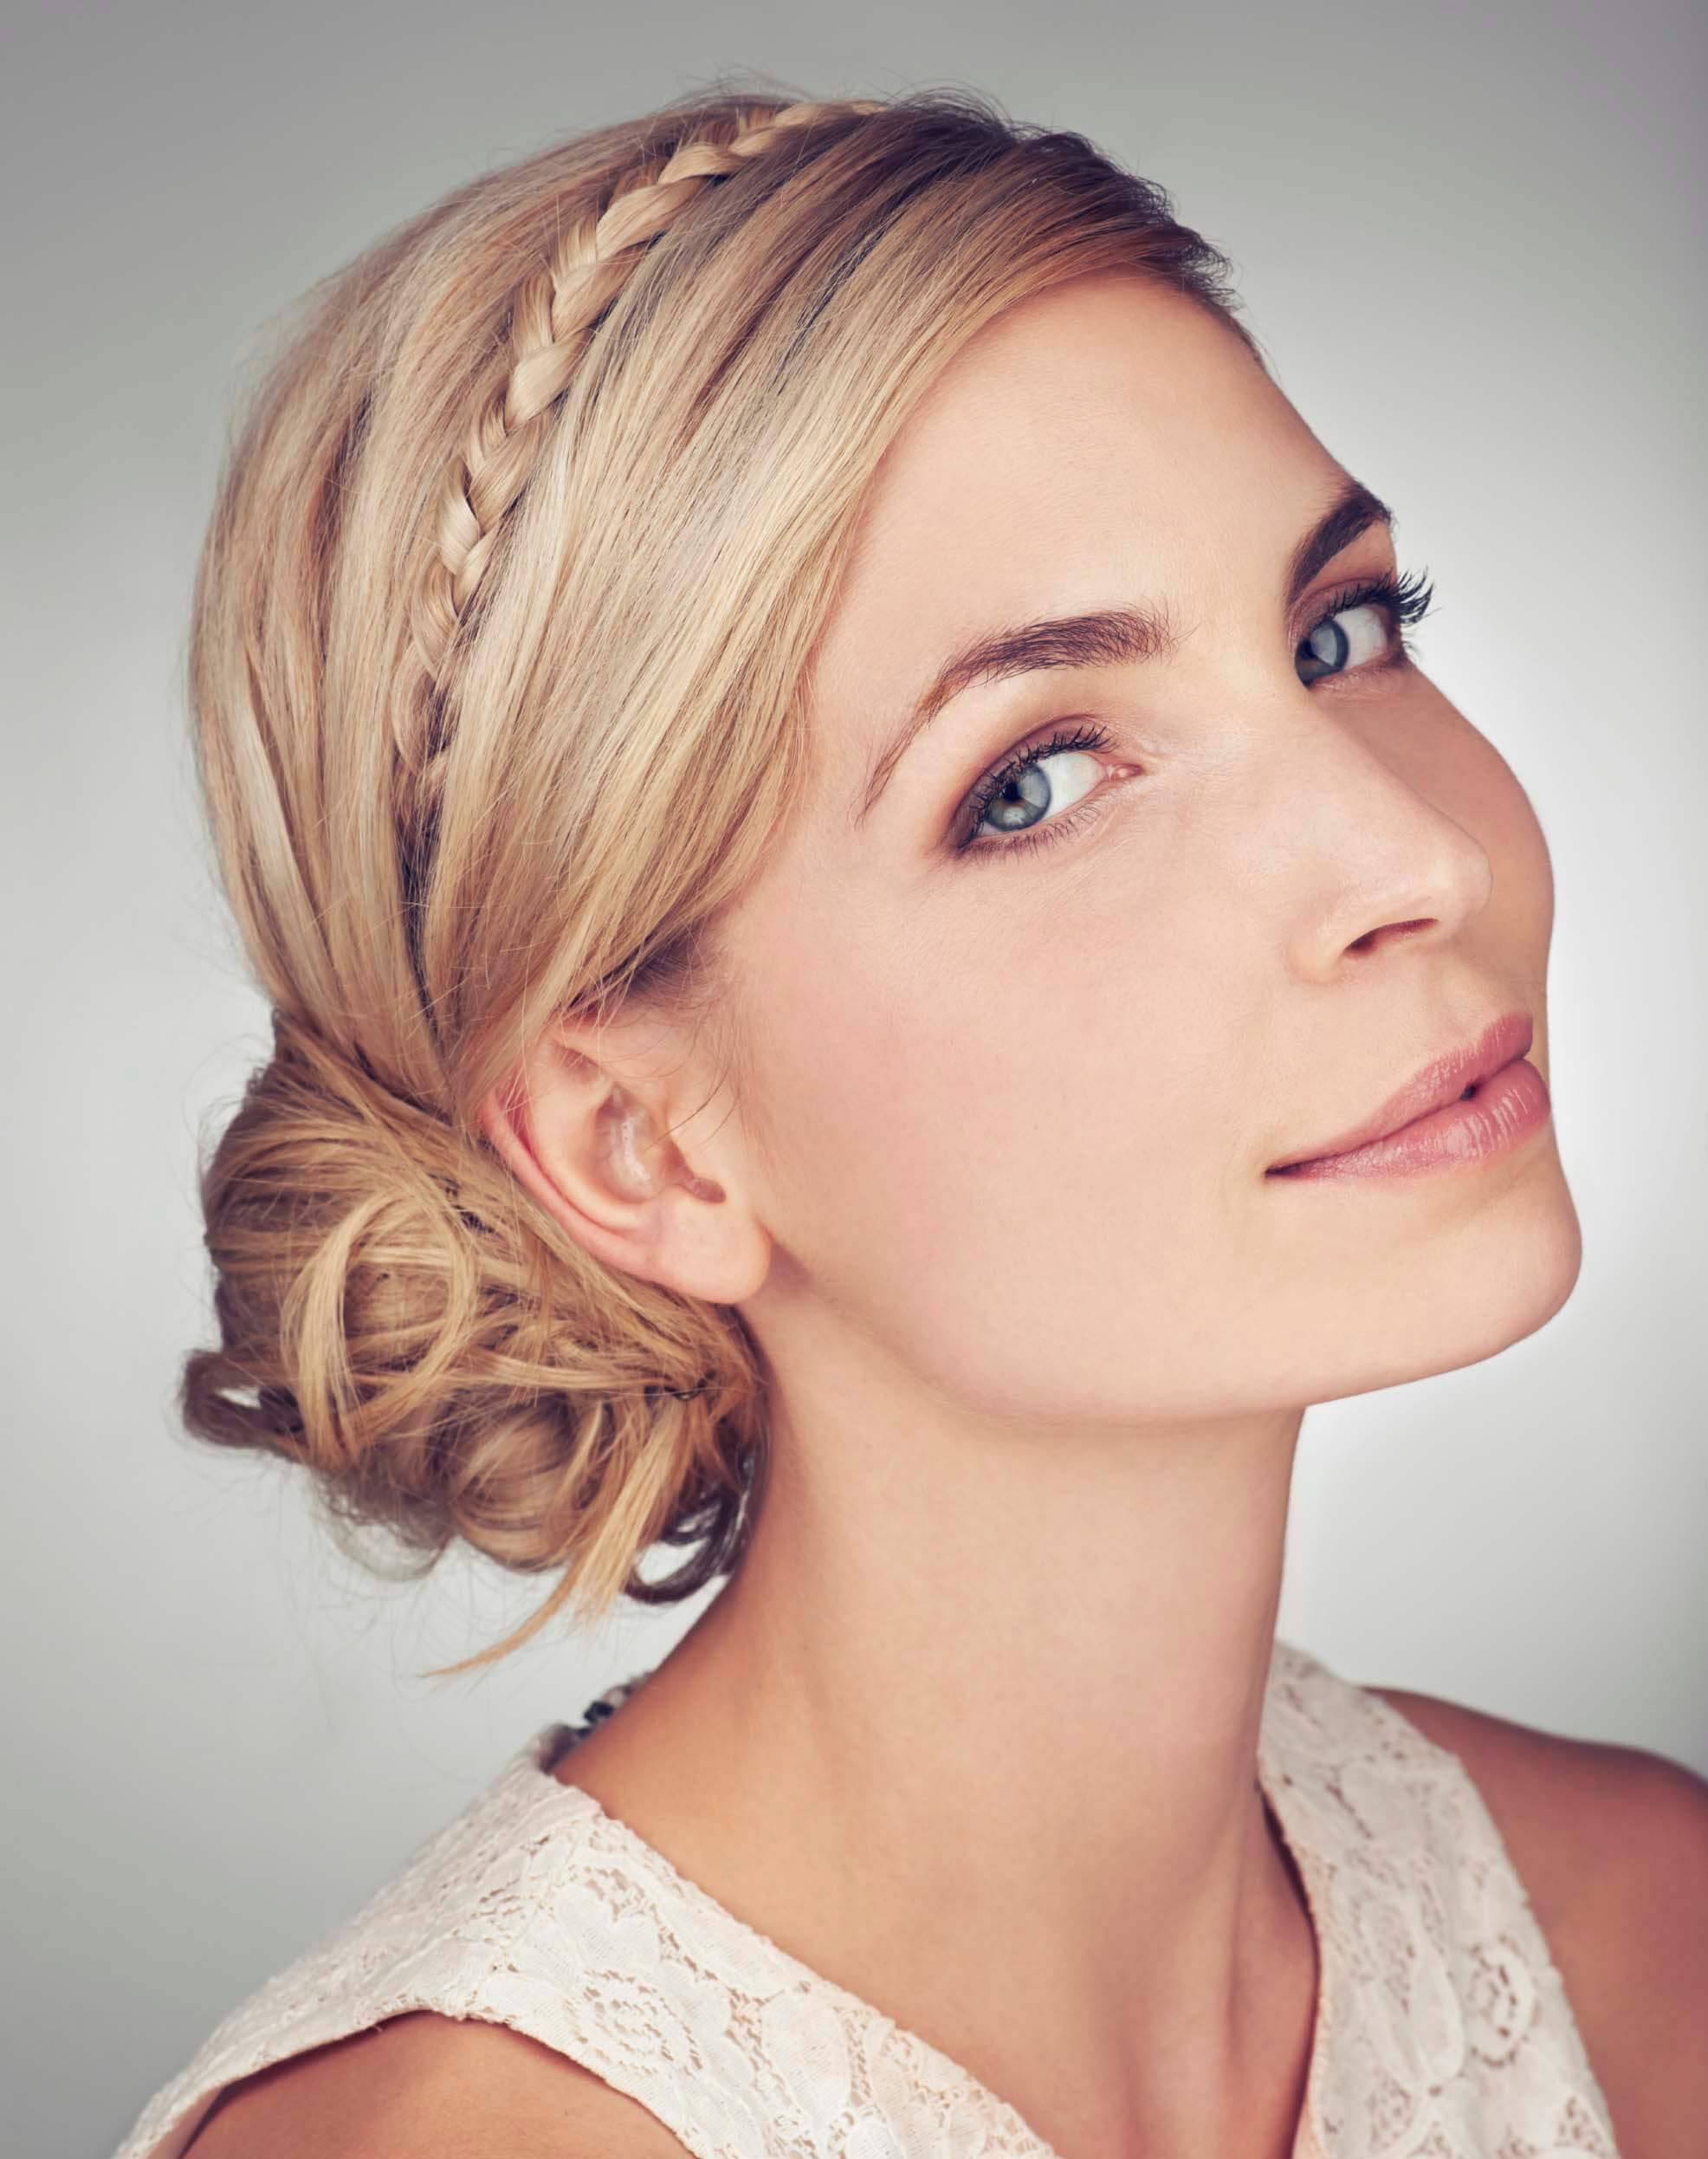 A blonde woman with low chignon hairstyle and braid